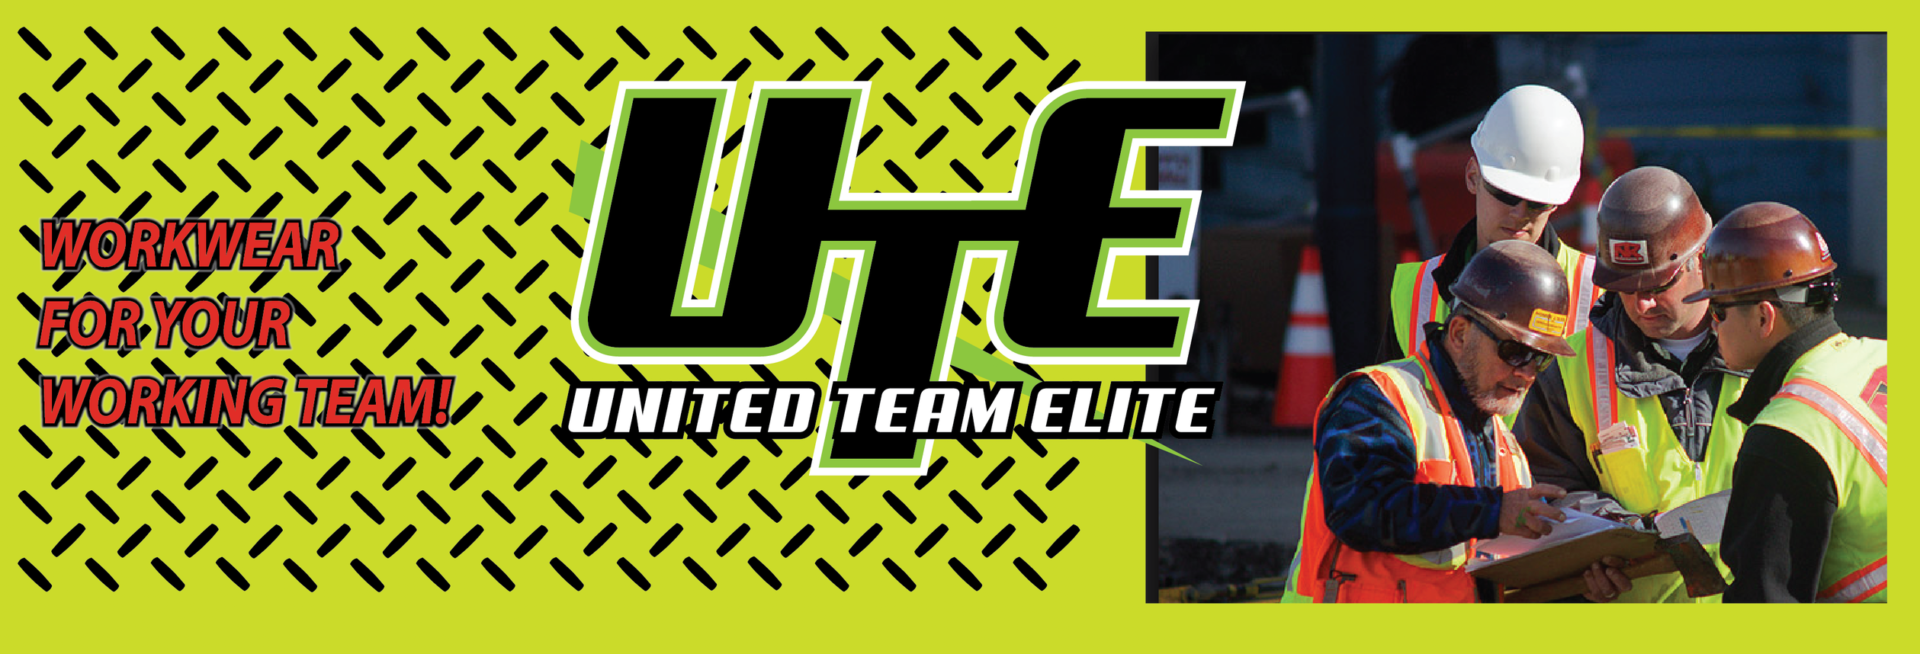 A picture of the united team elite logo.